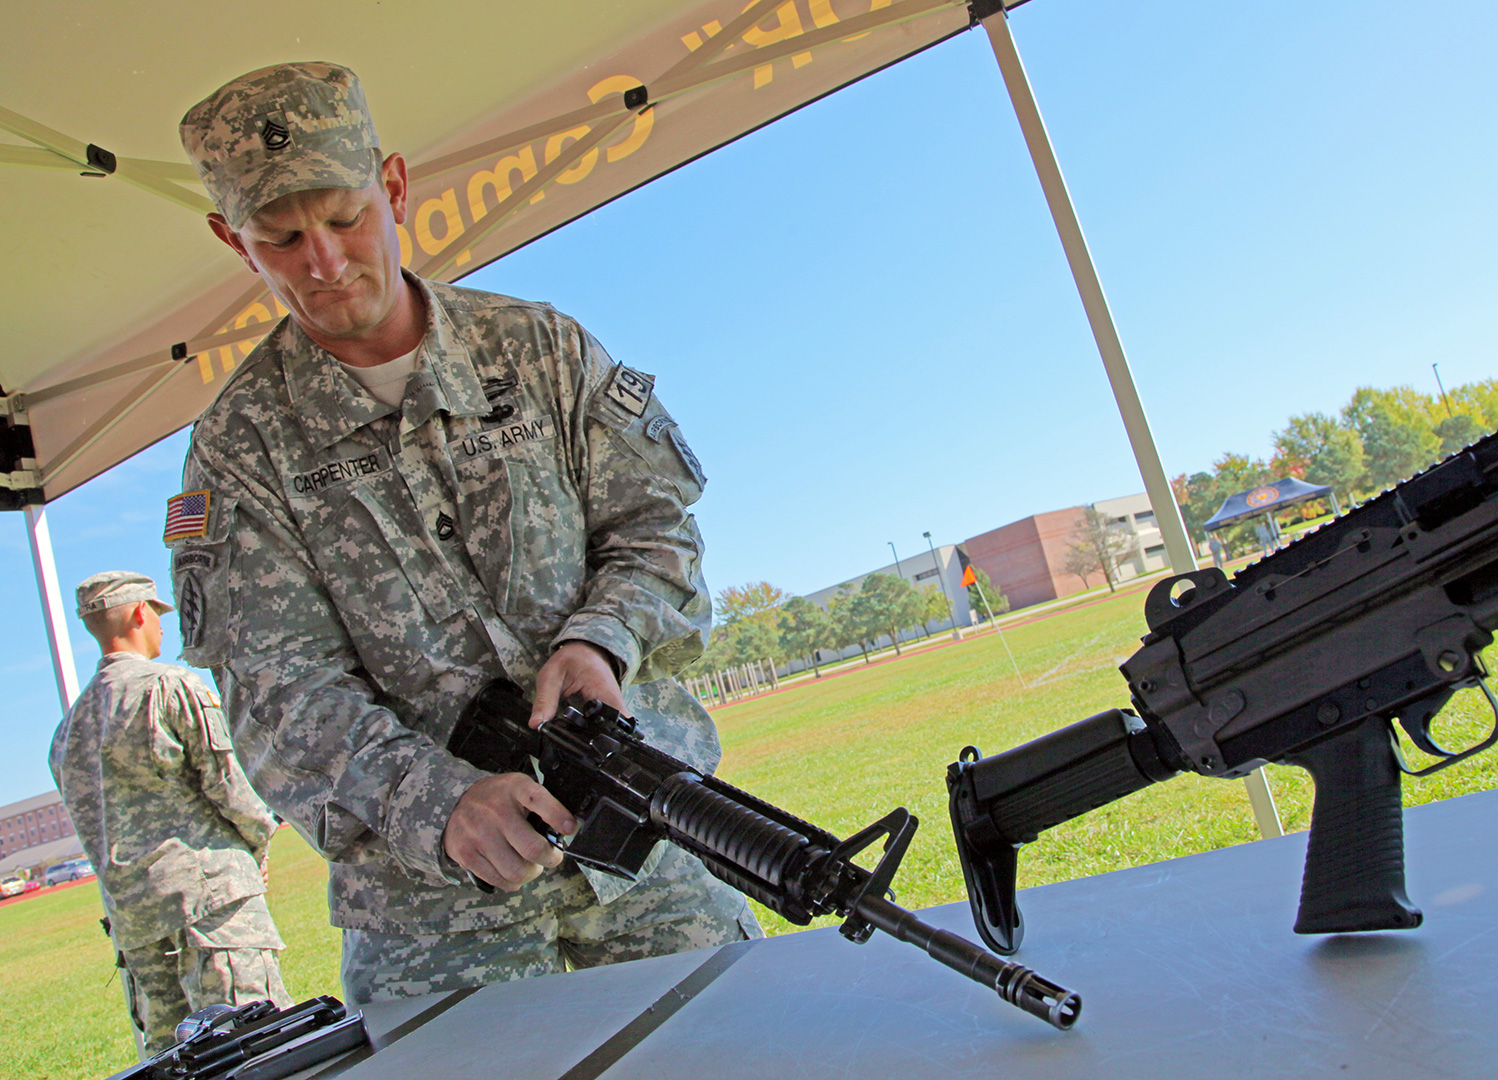 Carpenter assembles a weapon Thursday during the 2014 Best Warrior Competition. (Photo by Pvt. Rowan Anderson)